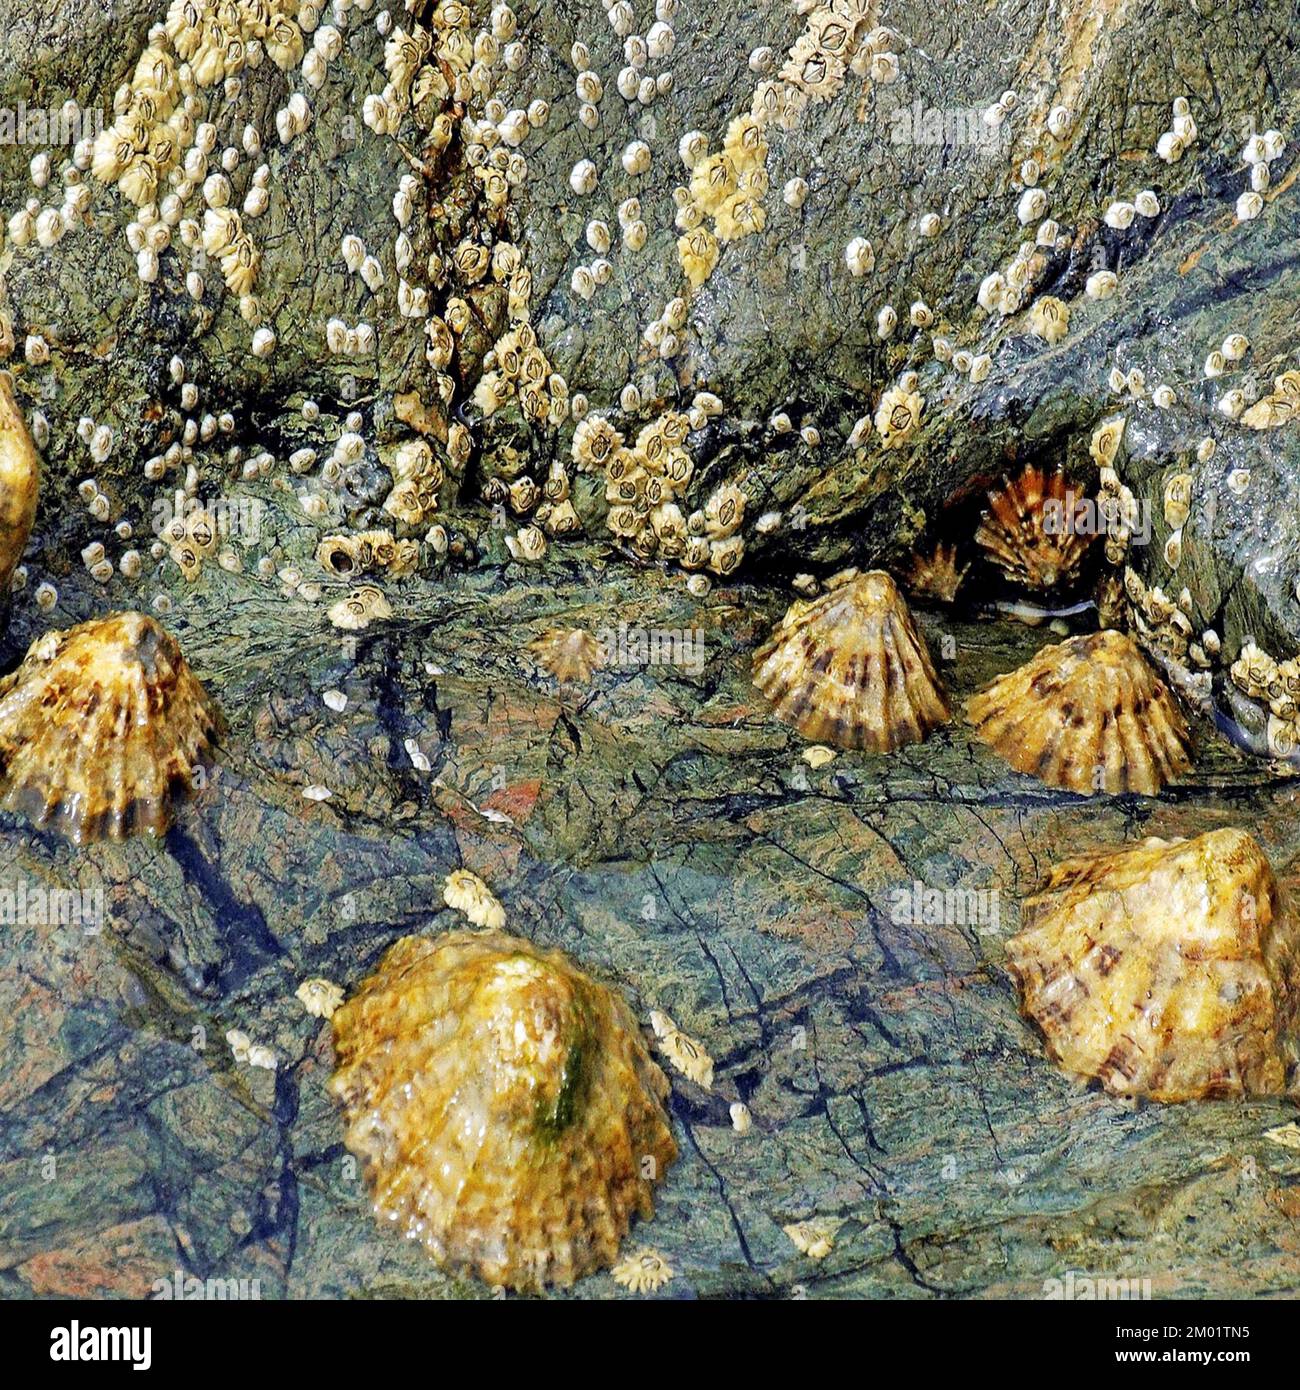 Colour photograph of coastal rock pool the image is a mixture of marine creatures and Geology showing rock patterns and textures. Stock Photo